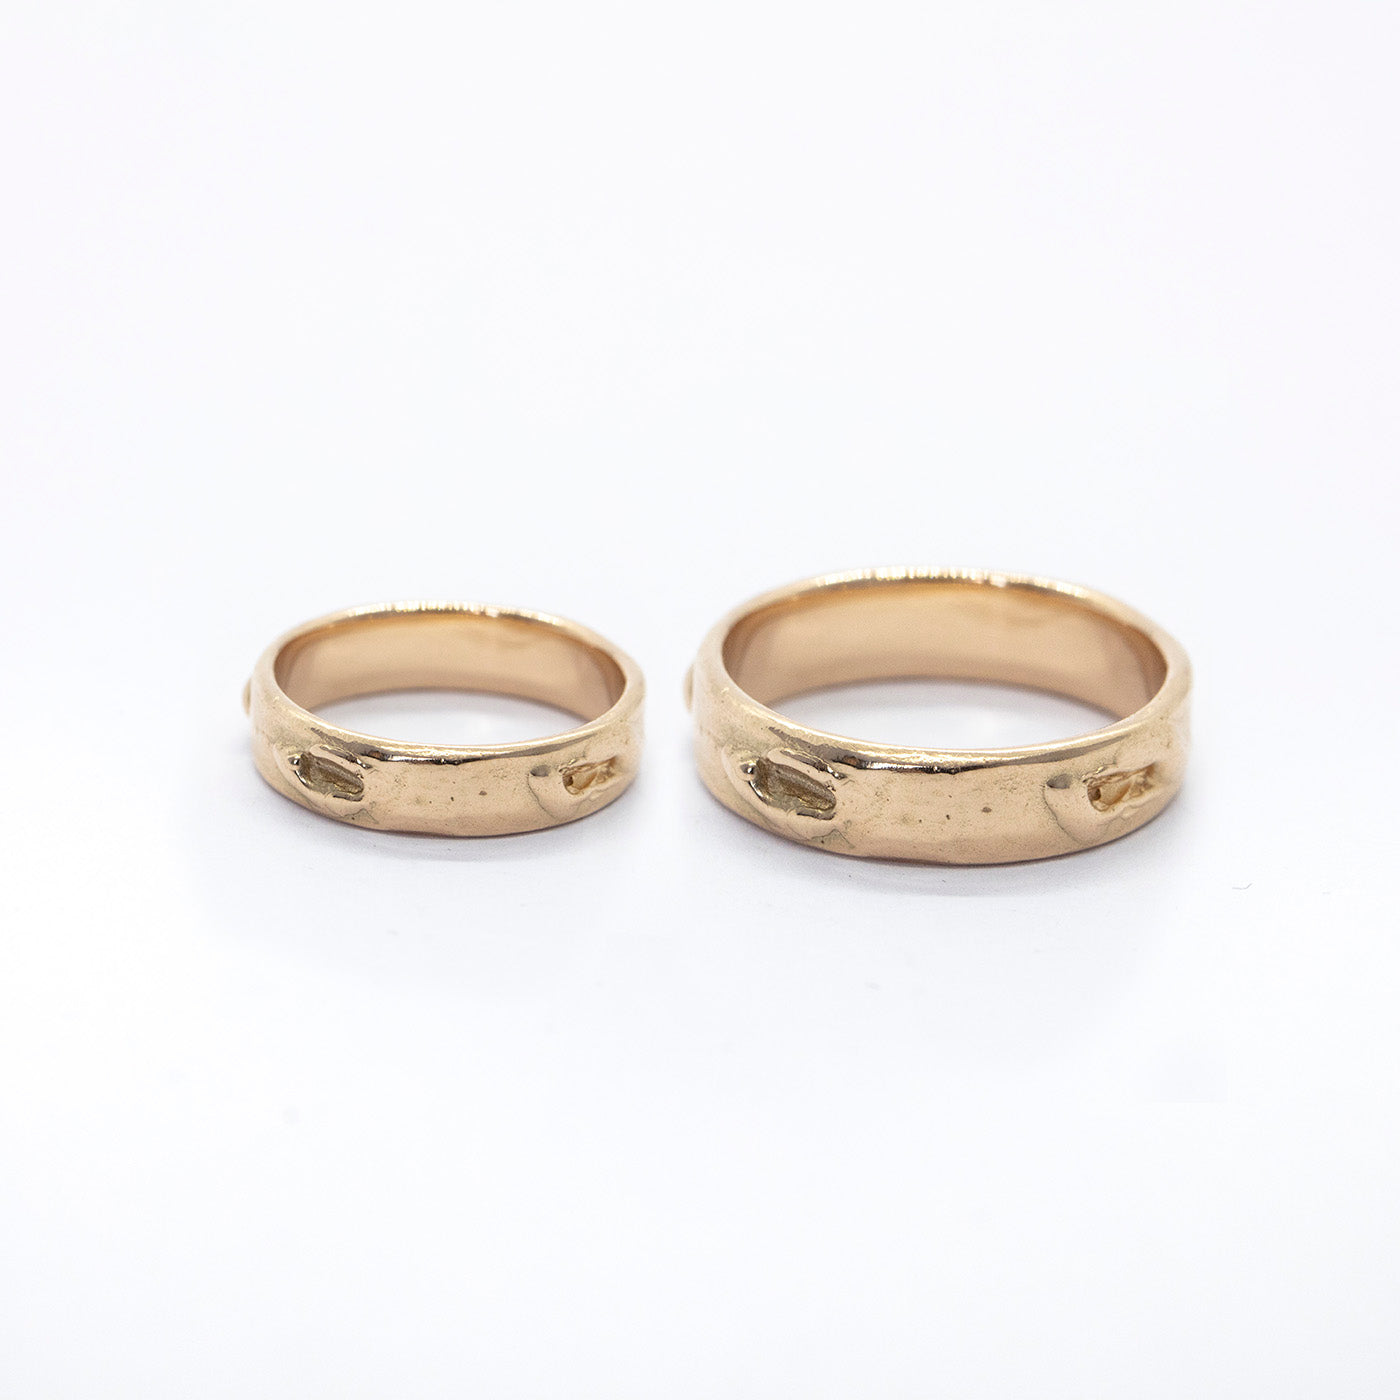     ring asteriae wedding band for her rose gold innan jewellery berlin